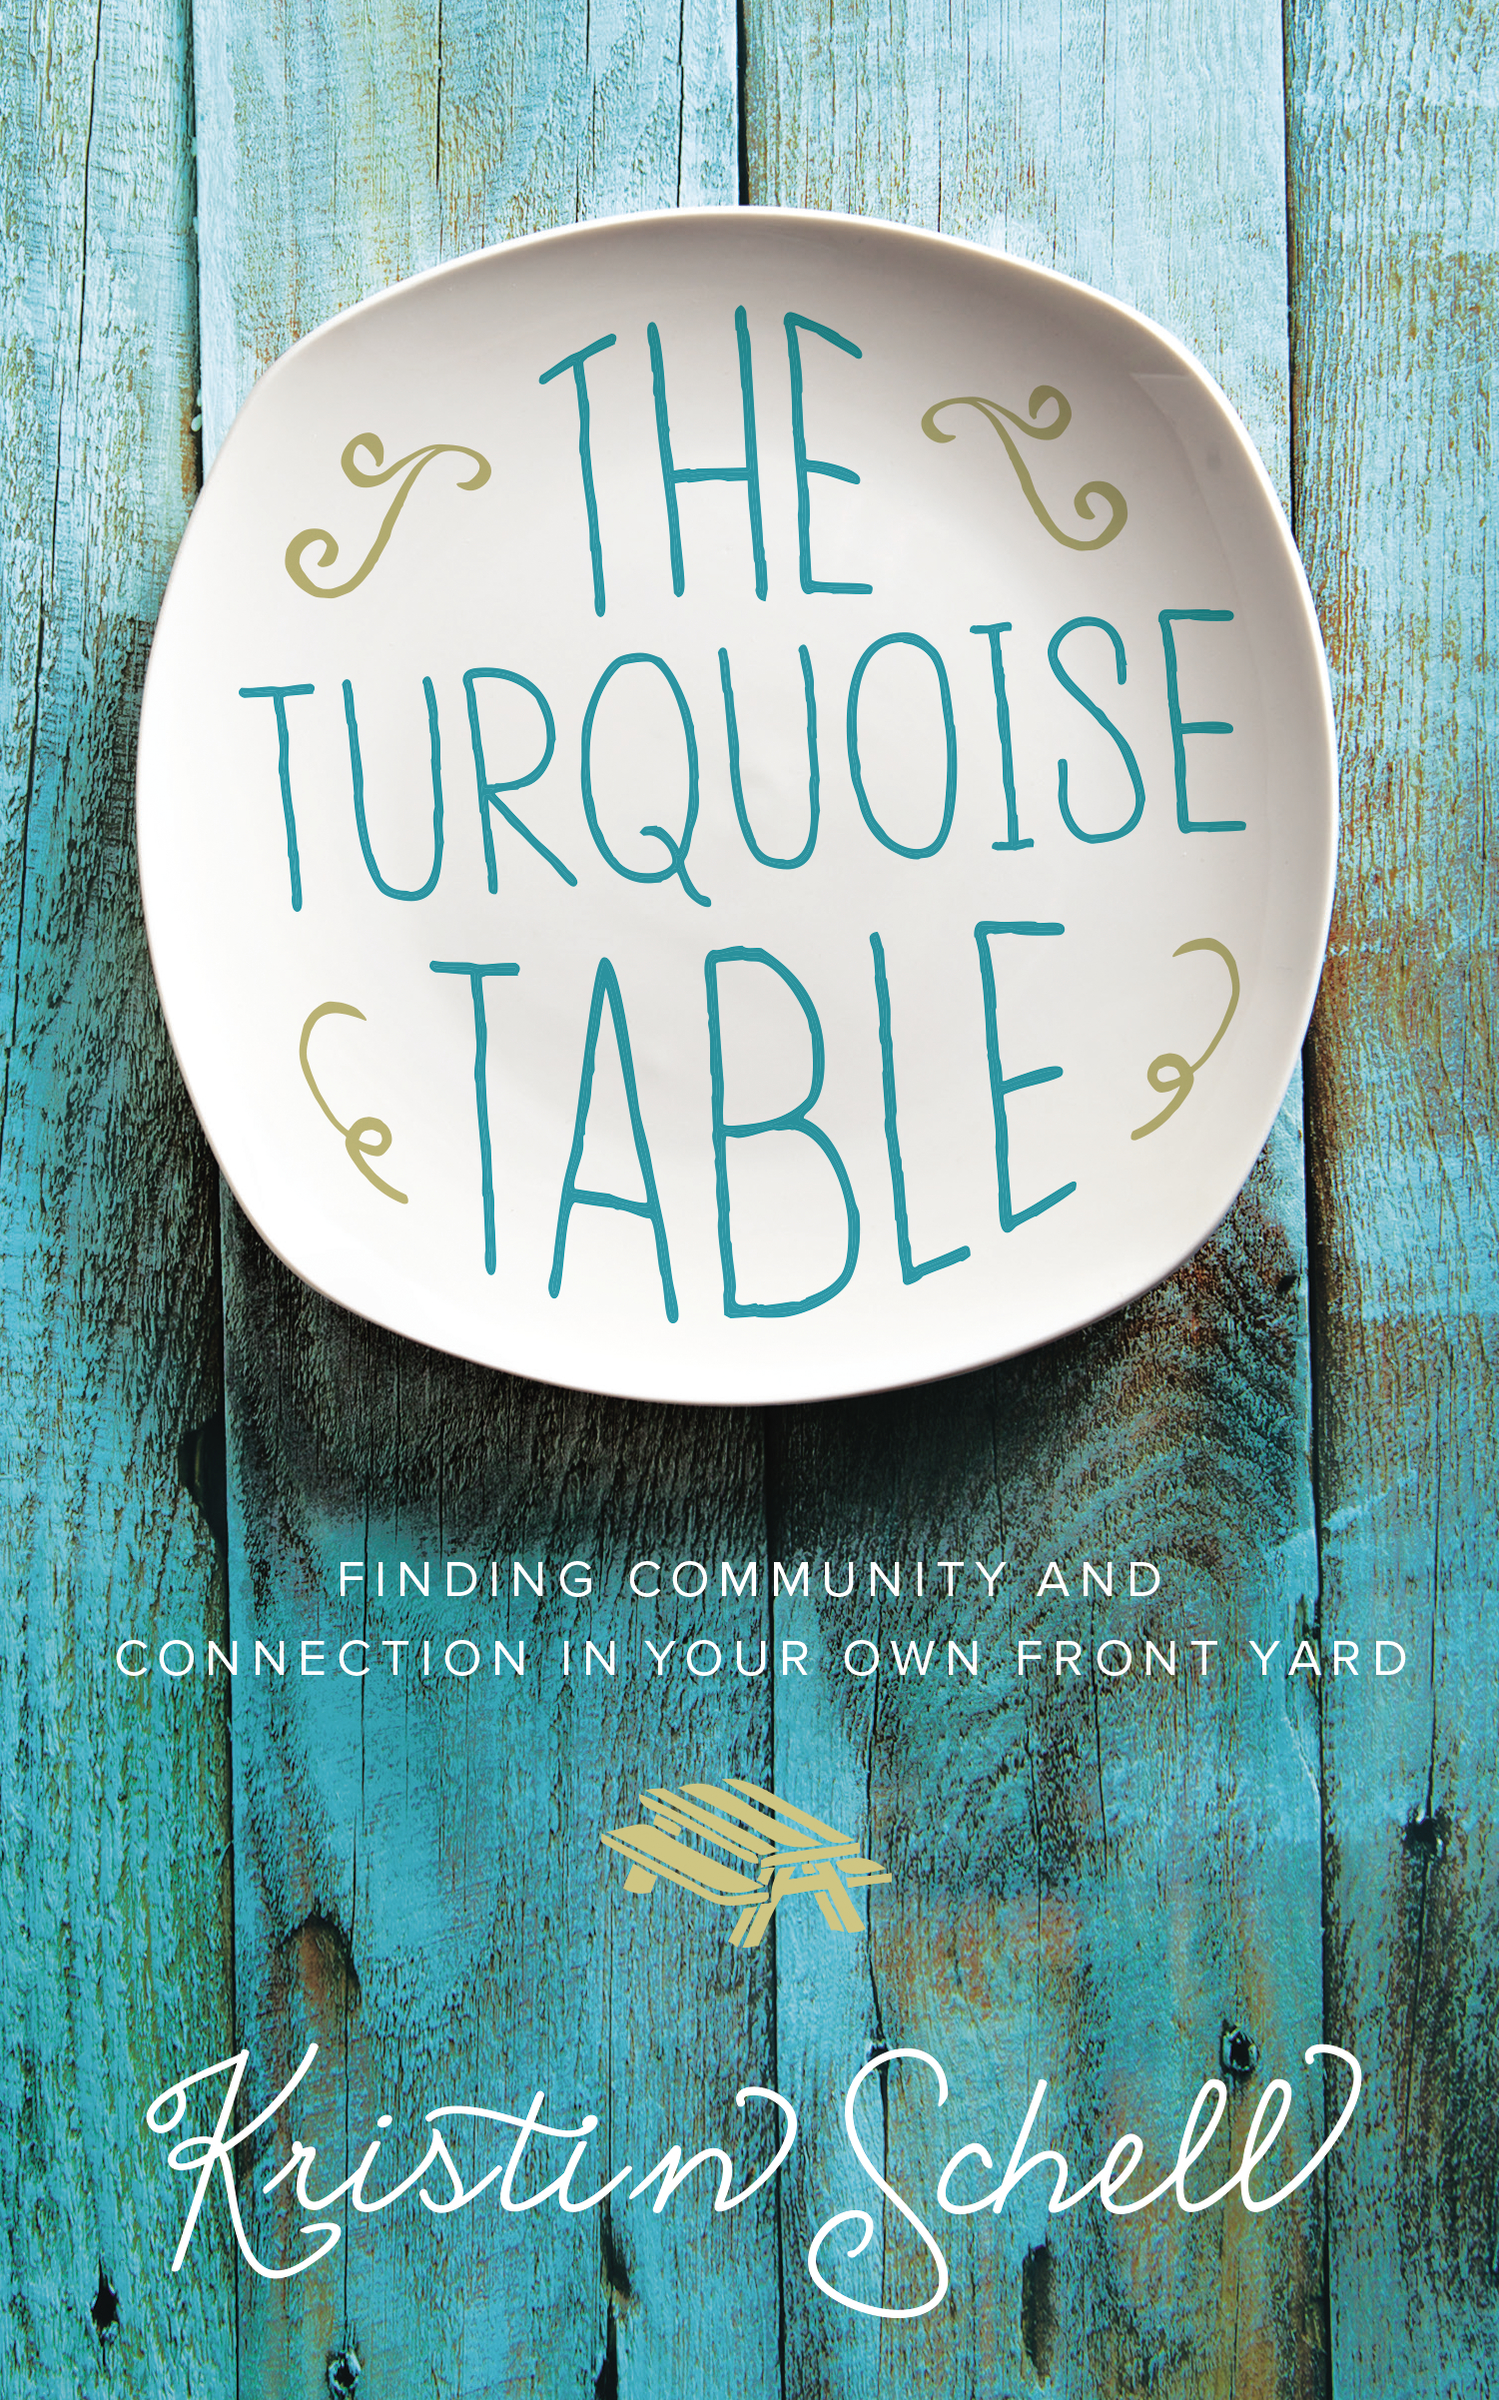 The turquoise table finding community and connection in our own front yard cover image